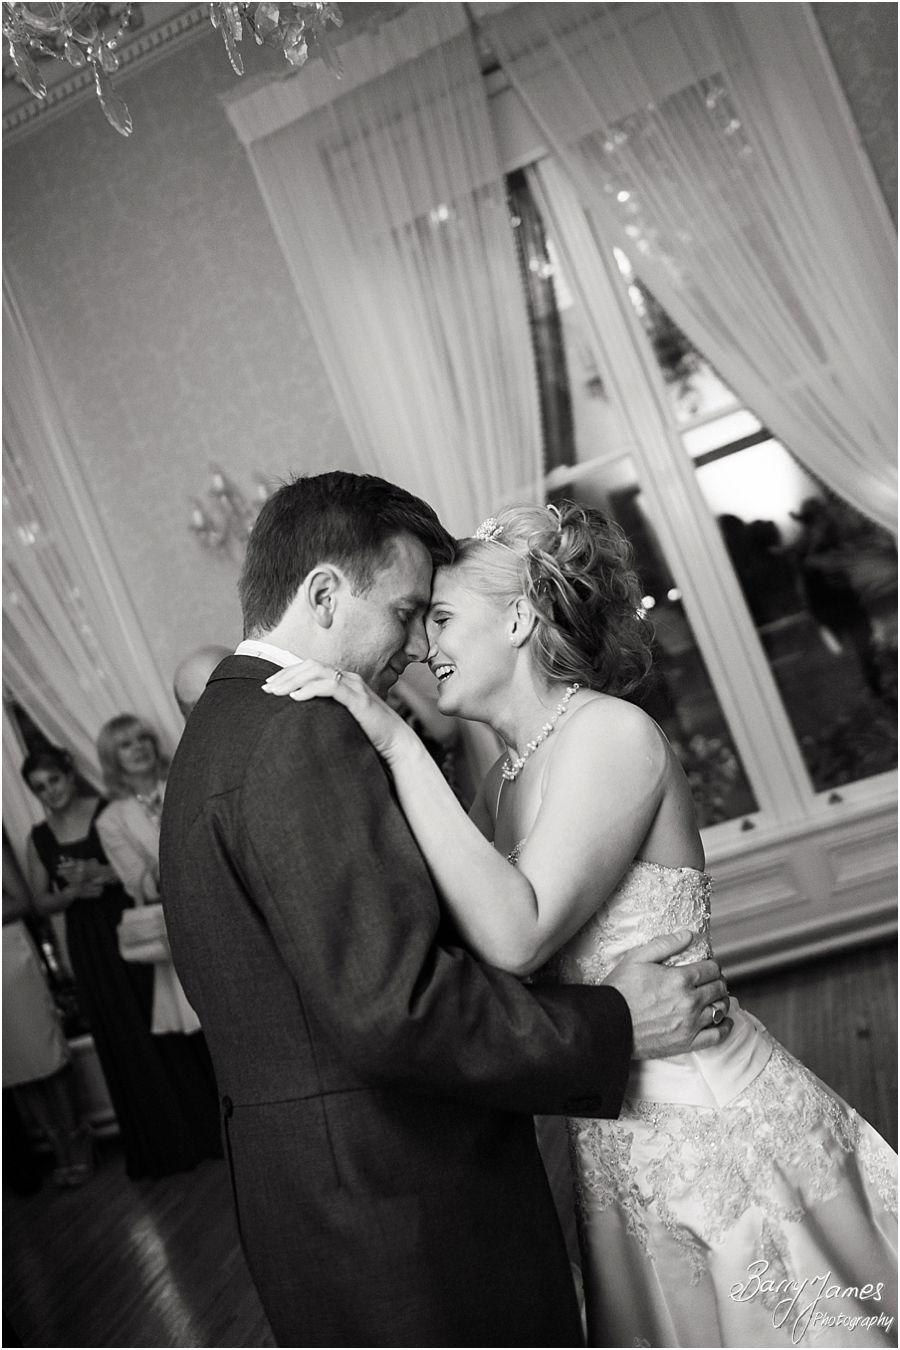 The first dance captured beautifully at Rodbaston Hall in Penkridge by Stafford Wedding Photographer Barry James